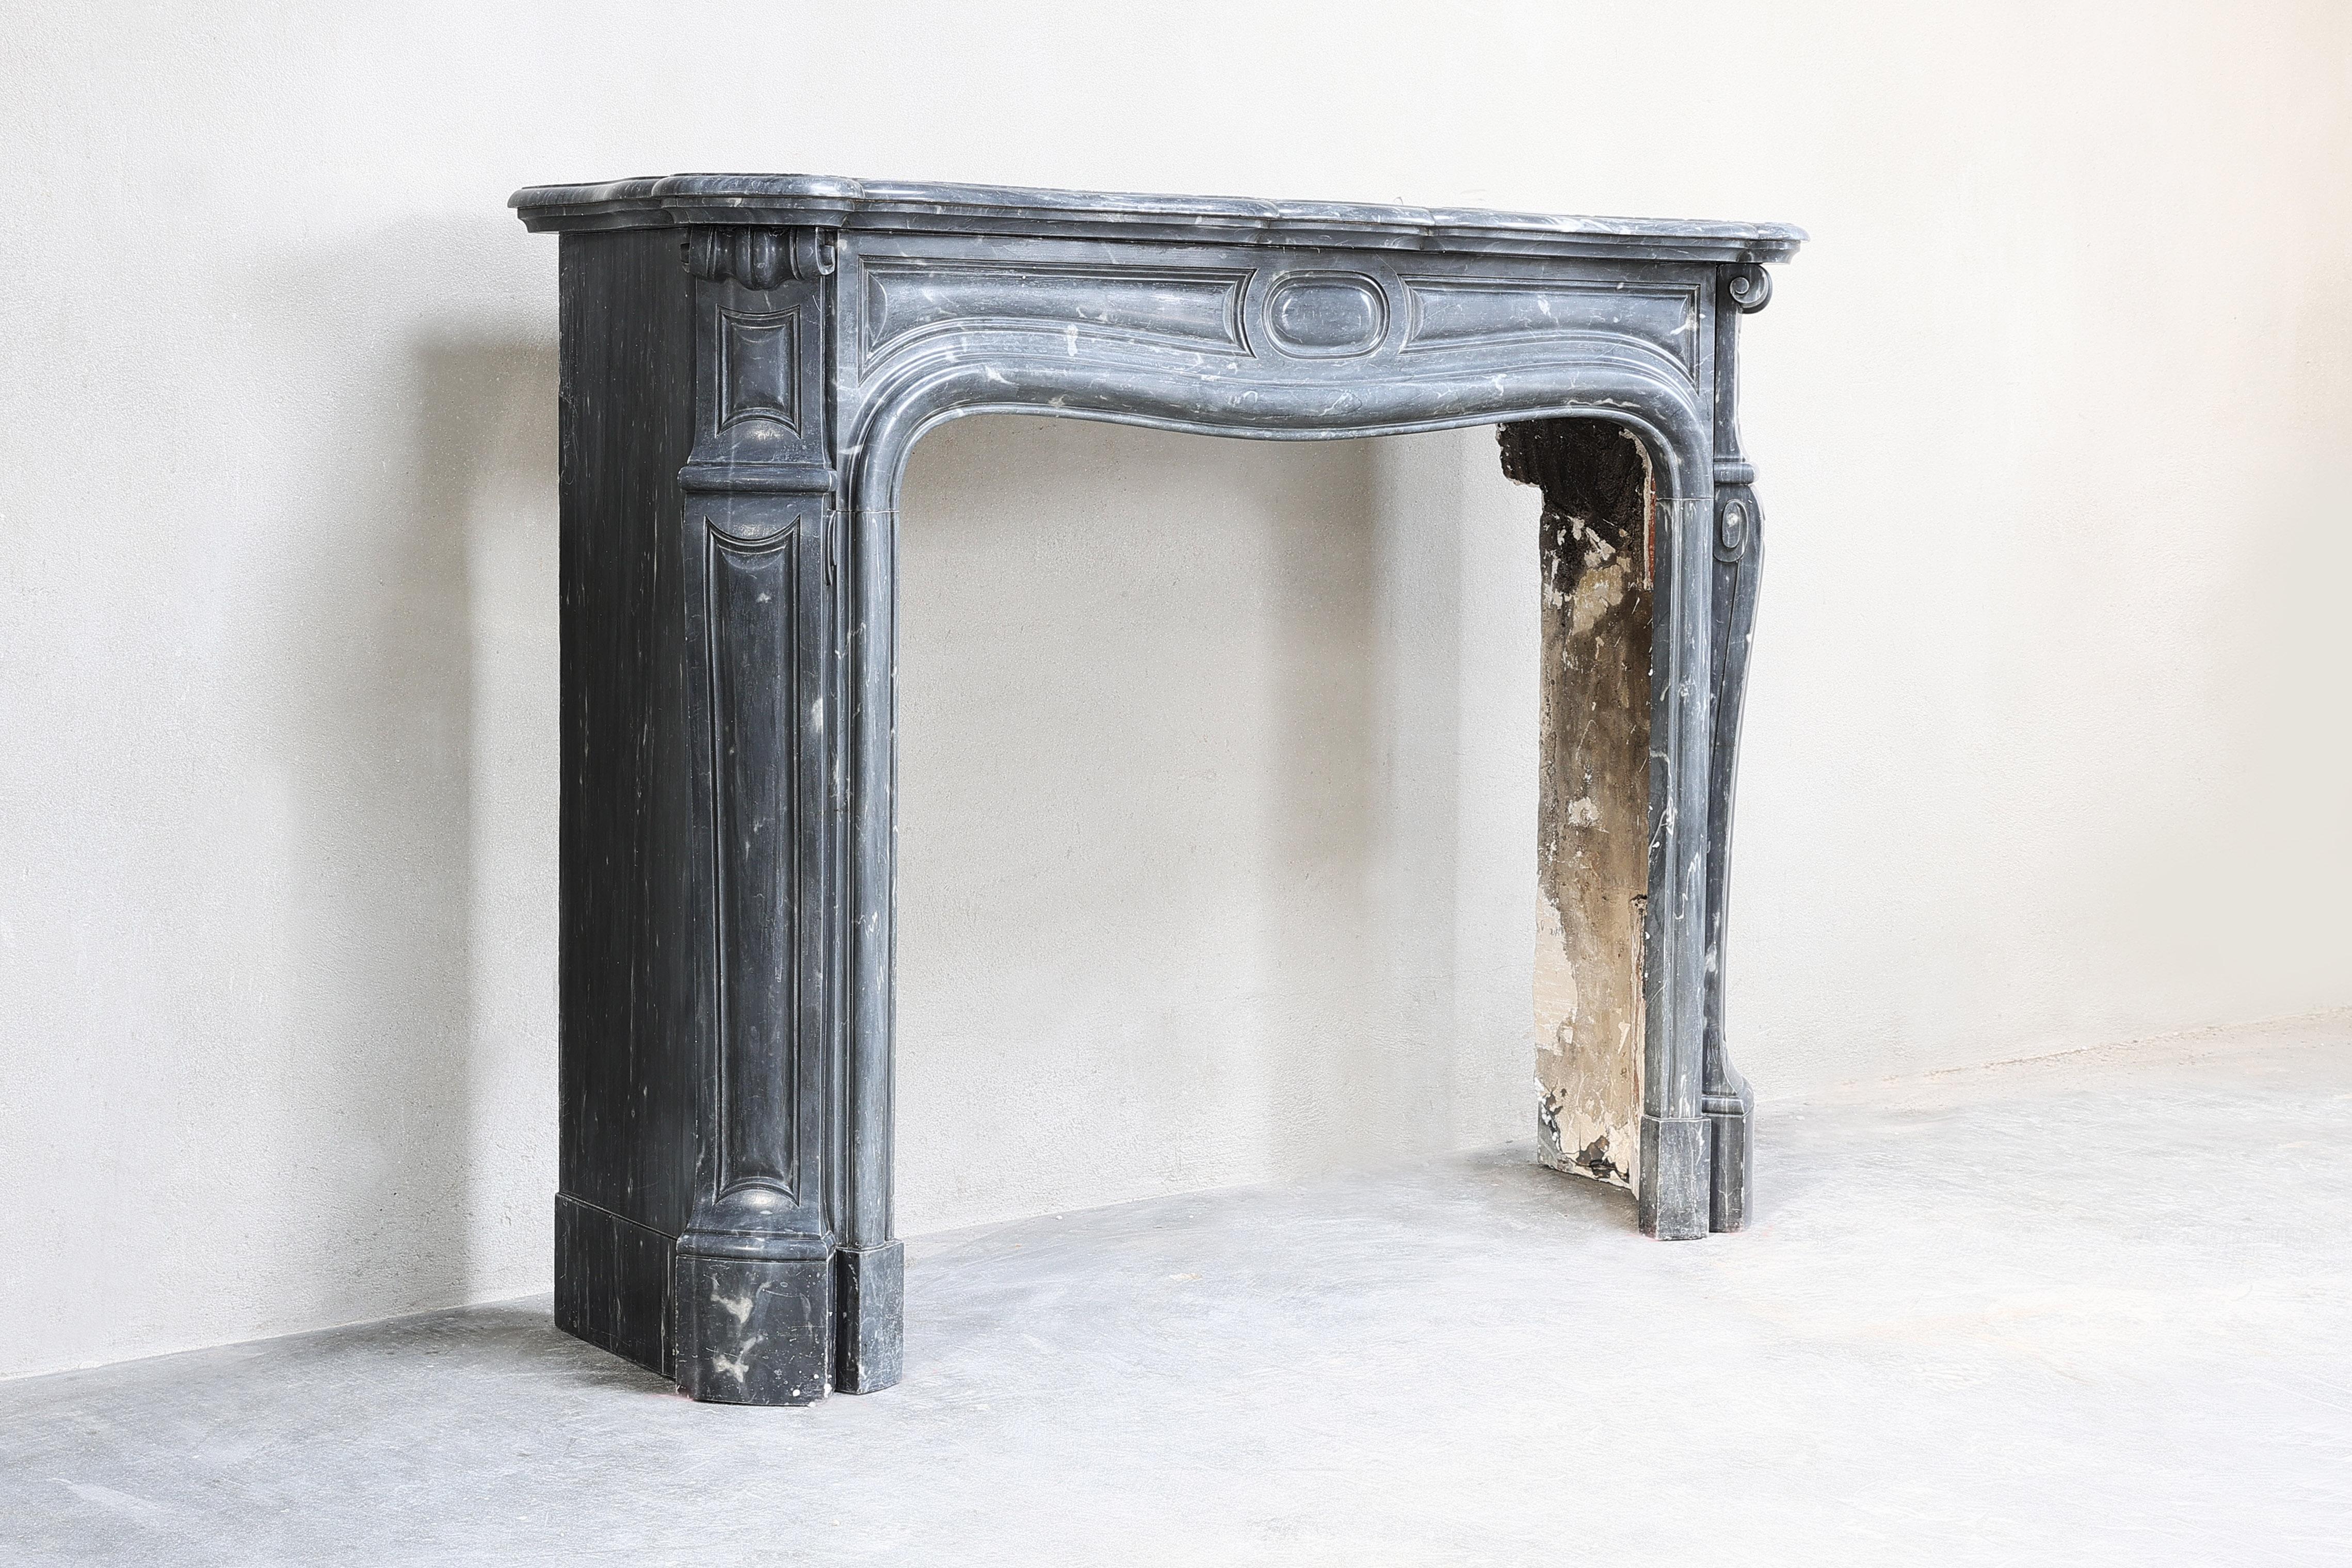 Beautiful antique fireplace made of blue turquin marble in pompadour style. This fireplace dates from the 19th century and has beautiful ornaments in the middle part and on the legs. The fossils and veins come into their own in this mantle! There